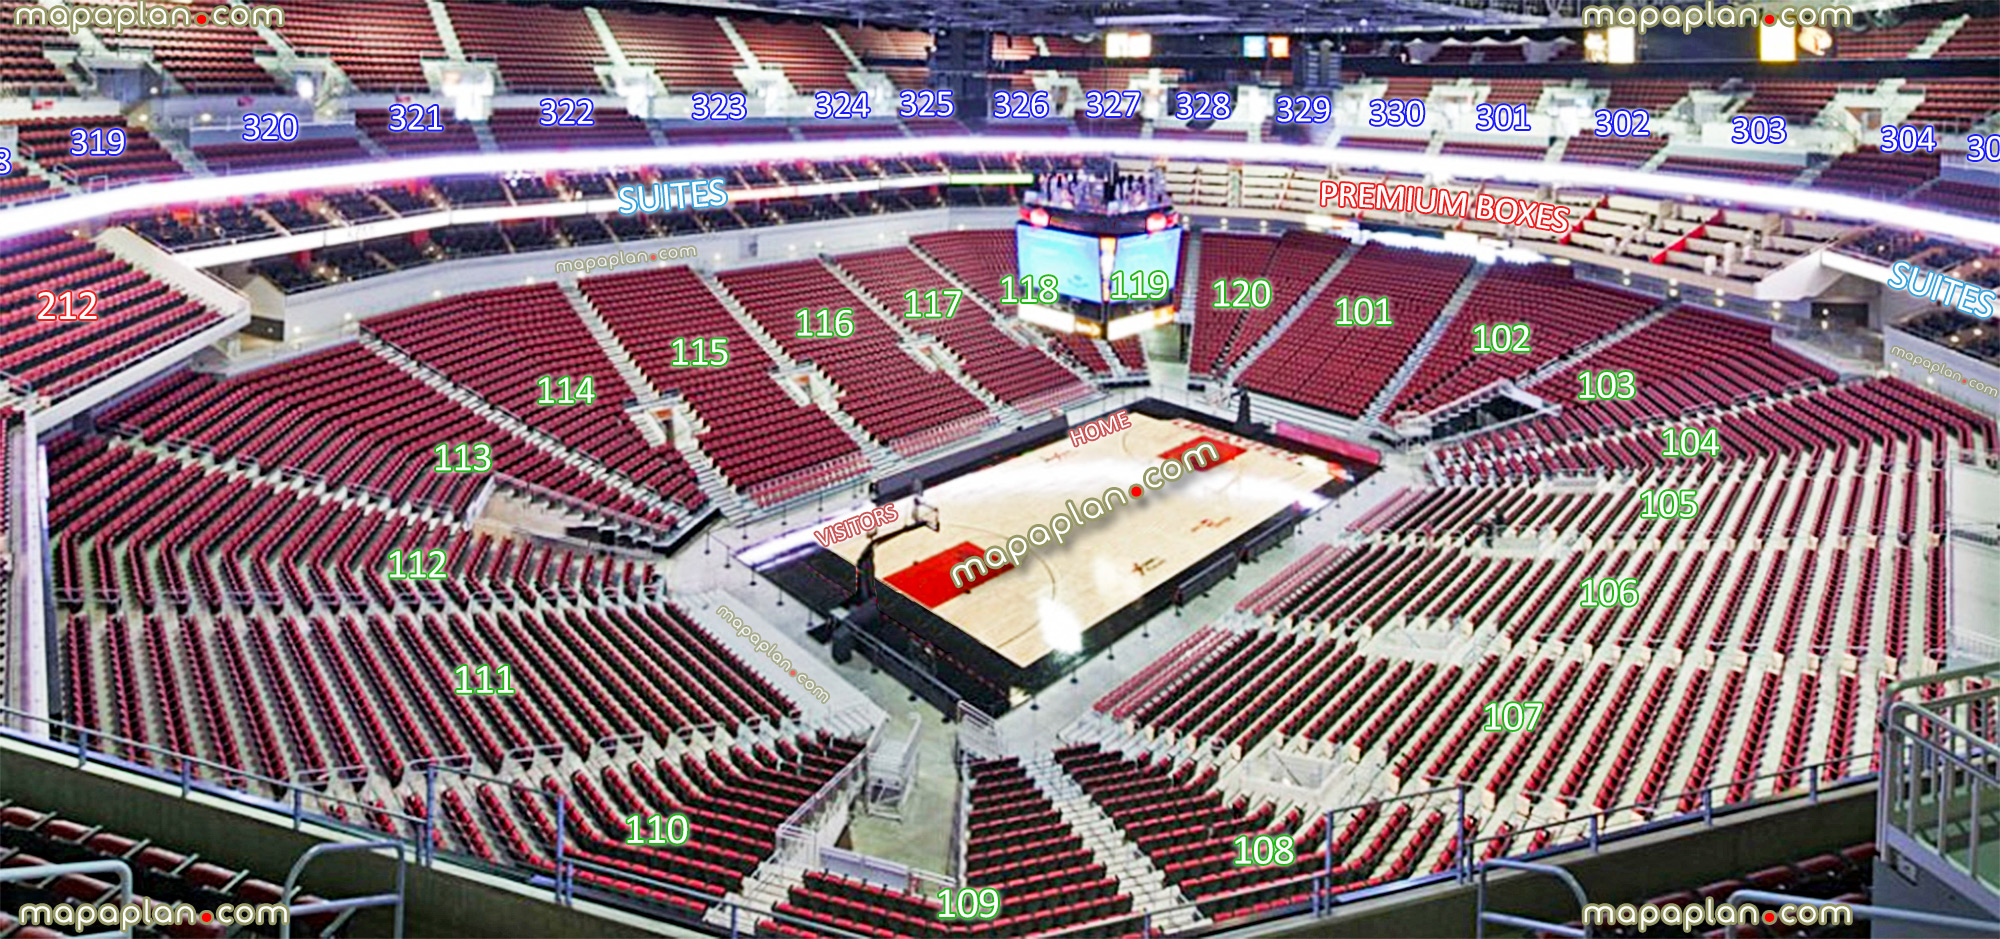 Kfc Yum Center Seating Chart With Seat Numbers